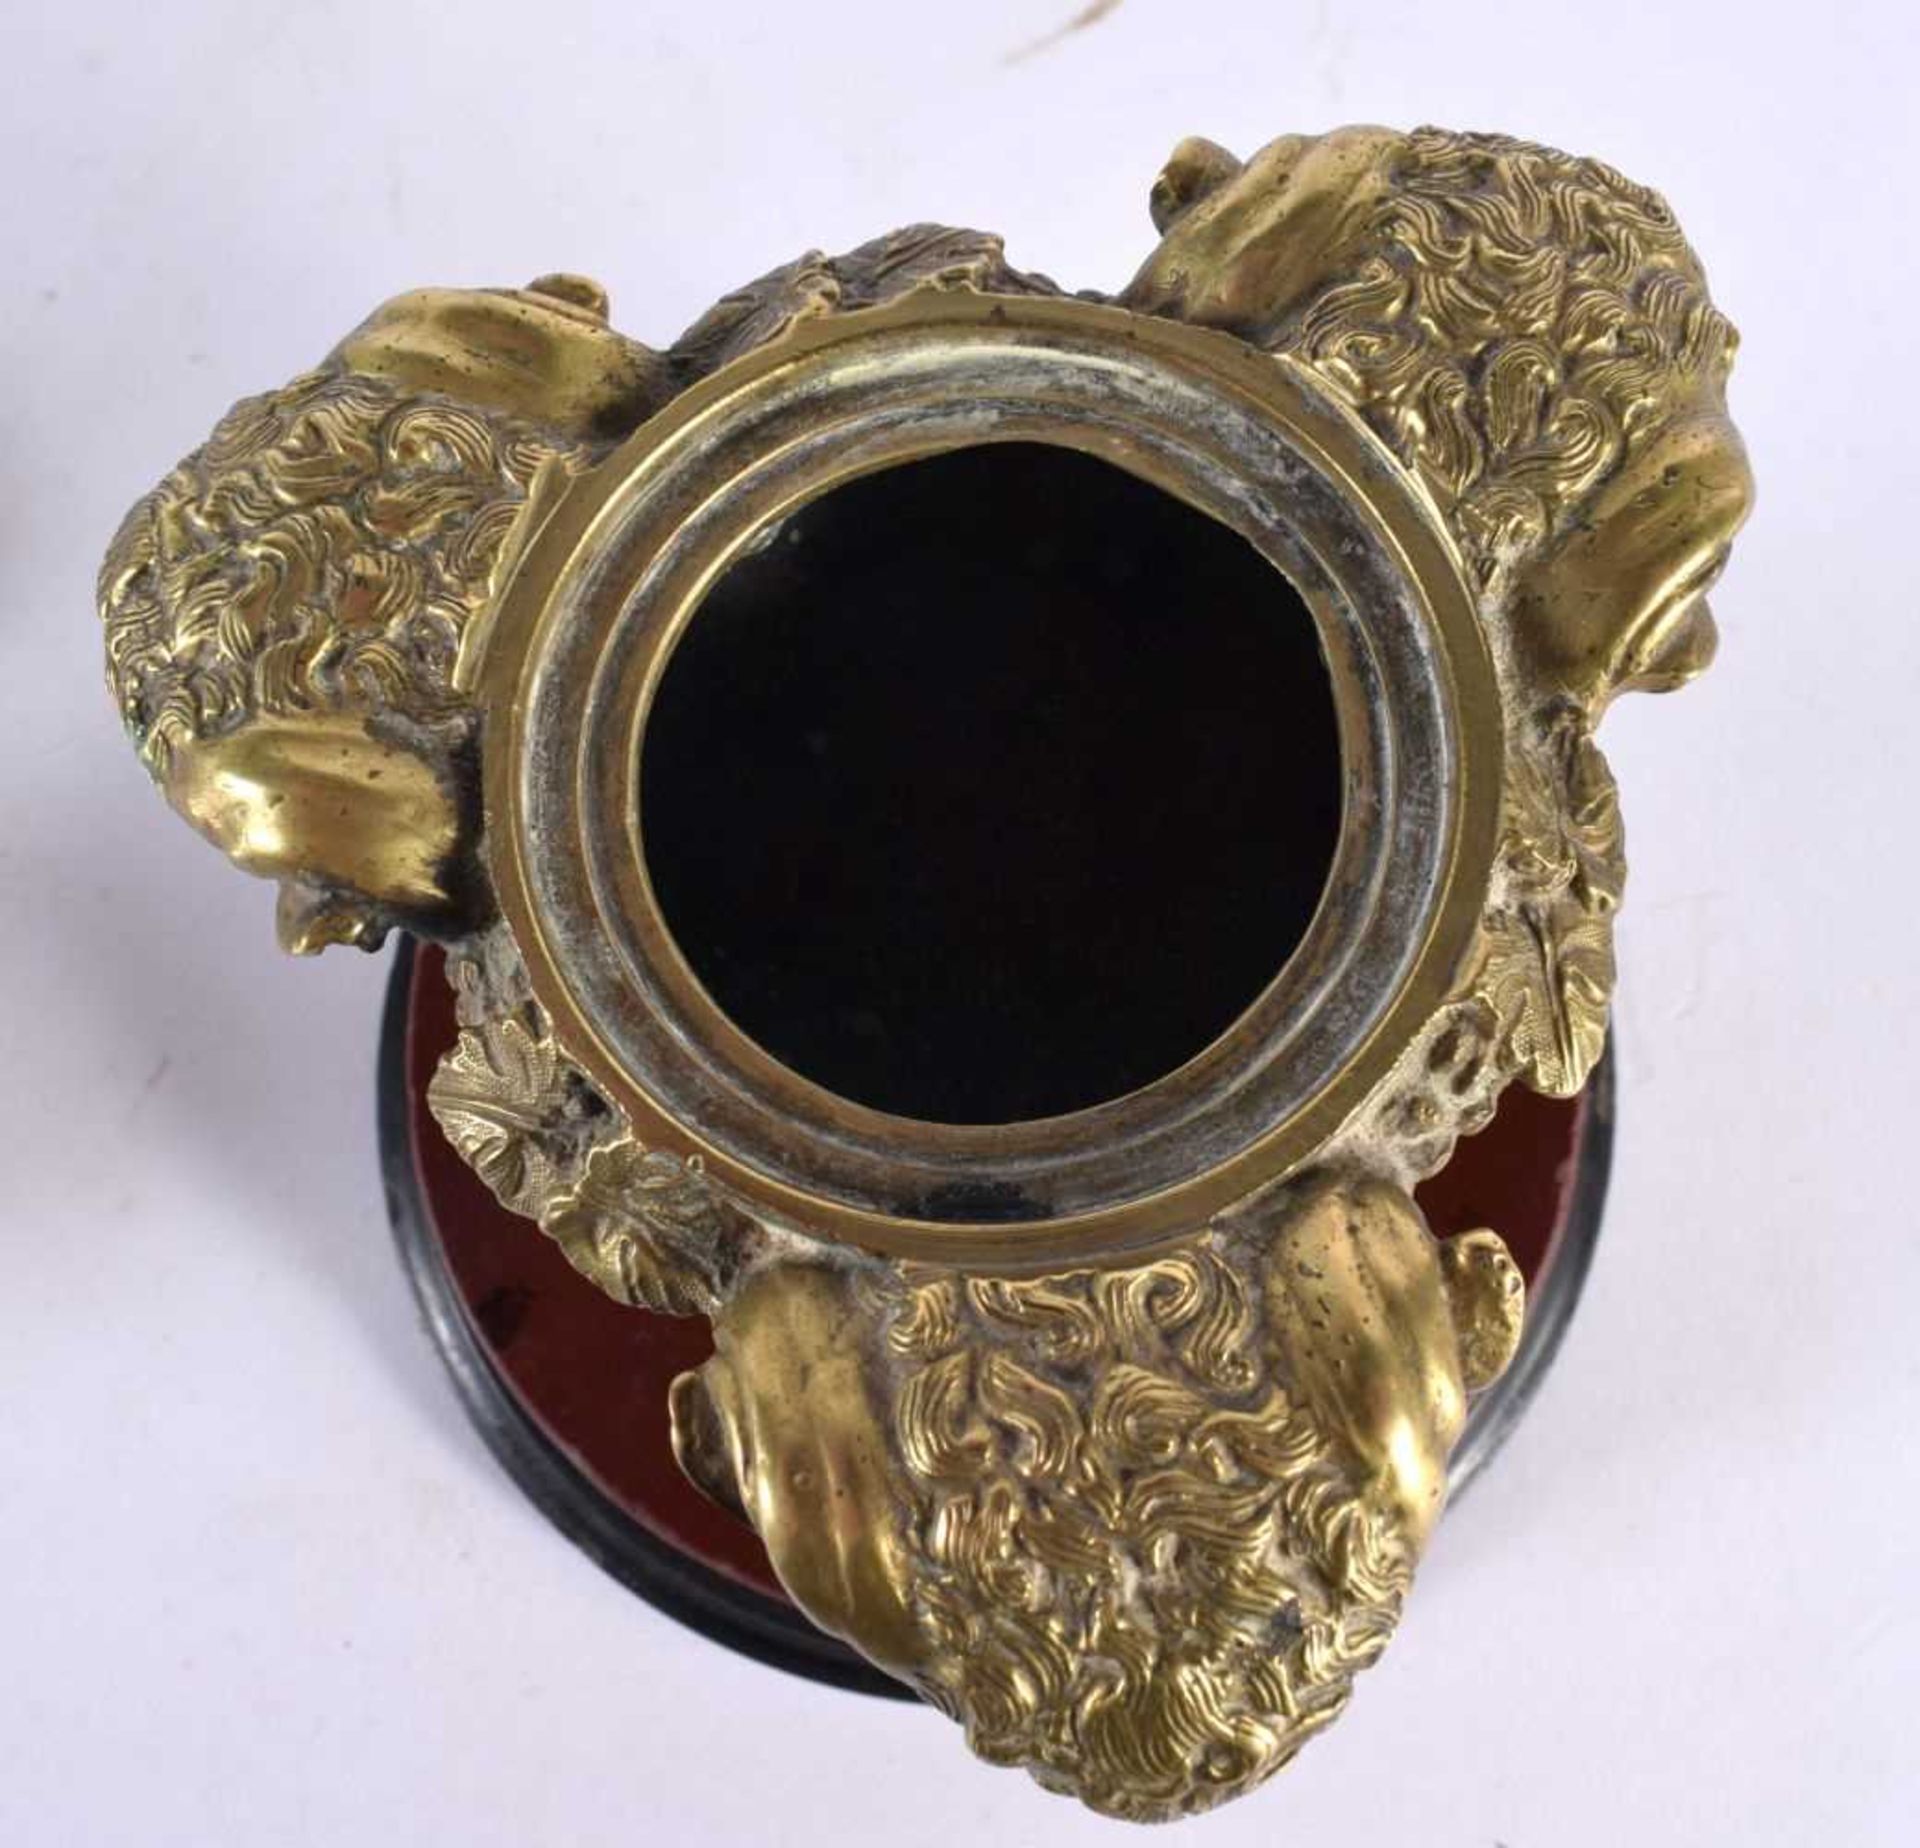 A FINE 19TH CENTURY EUROPEAN GRAND TOUR BRONZE INKWELL AND COVER upon a red marble base, formed with - Image 9 of 10